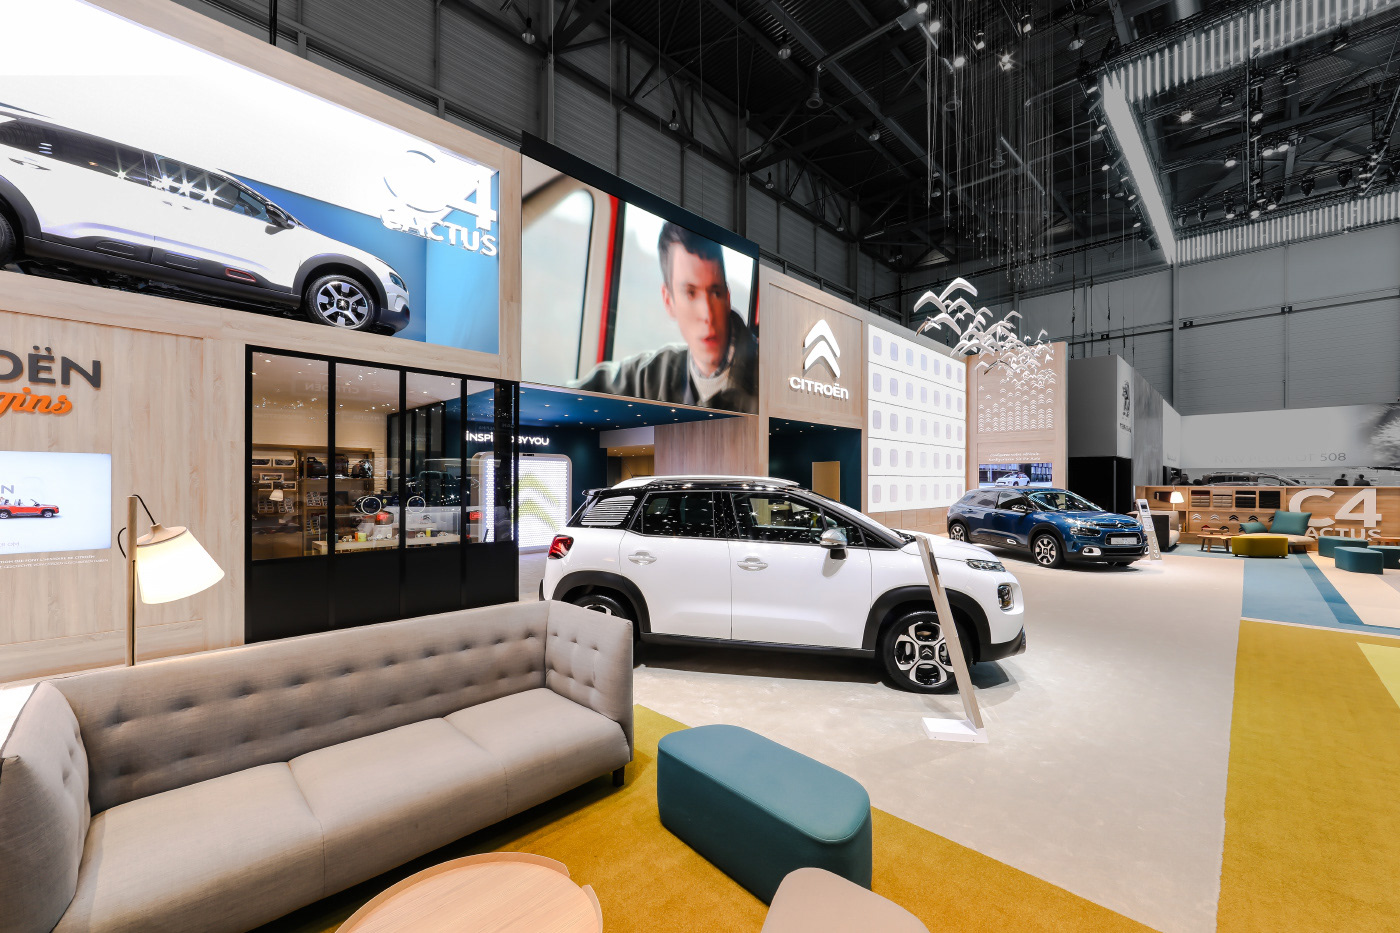 citroen booth booth design Gims  Stand messestand stand design citroen stand gims 2018 Geneva